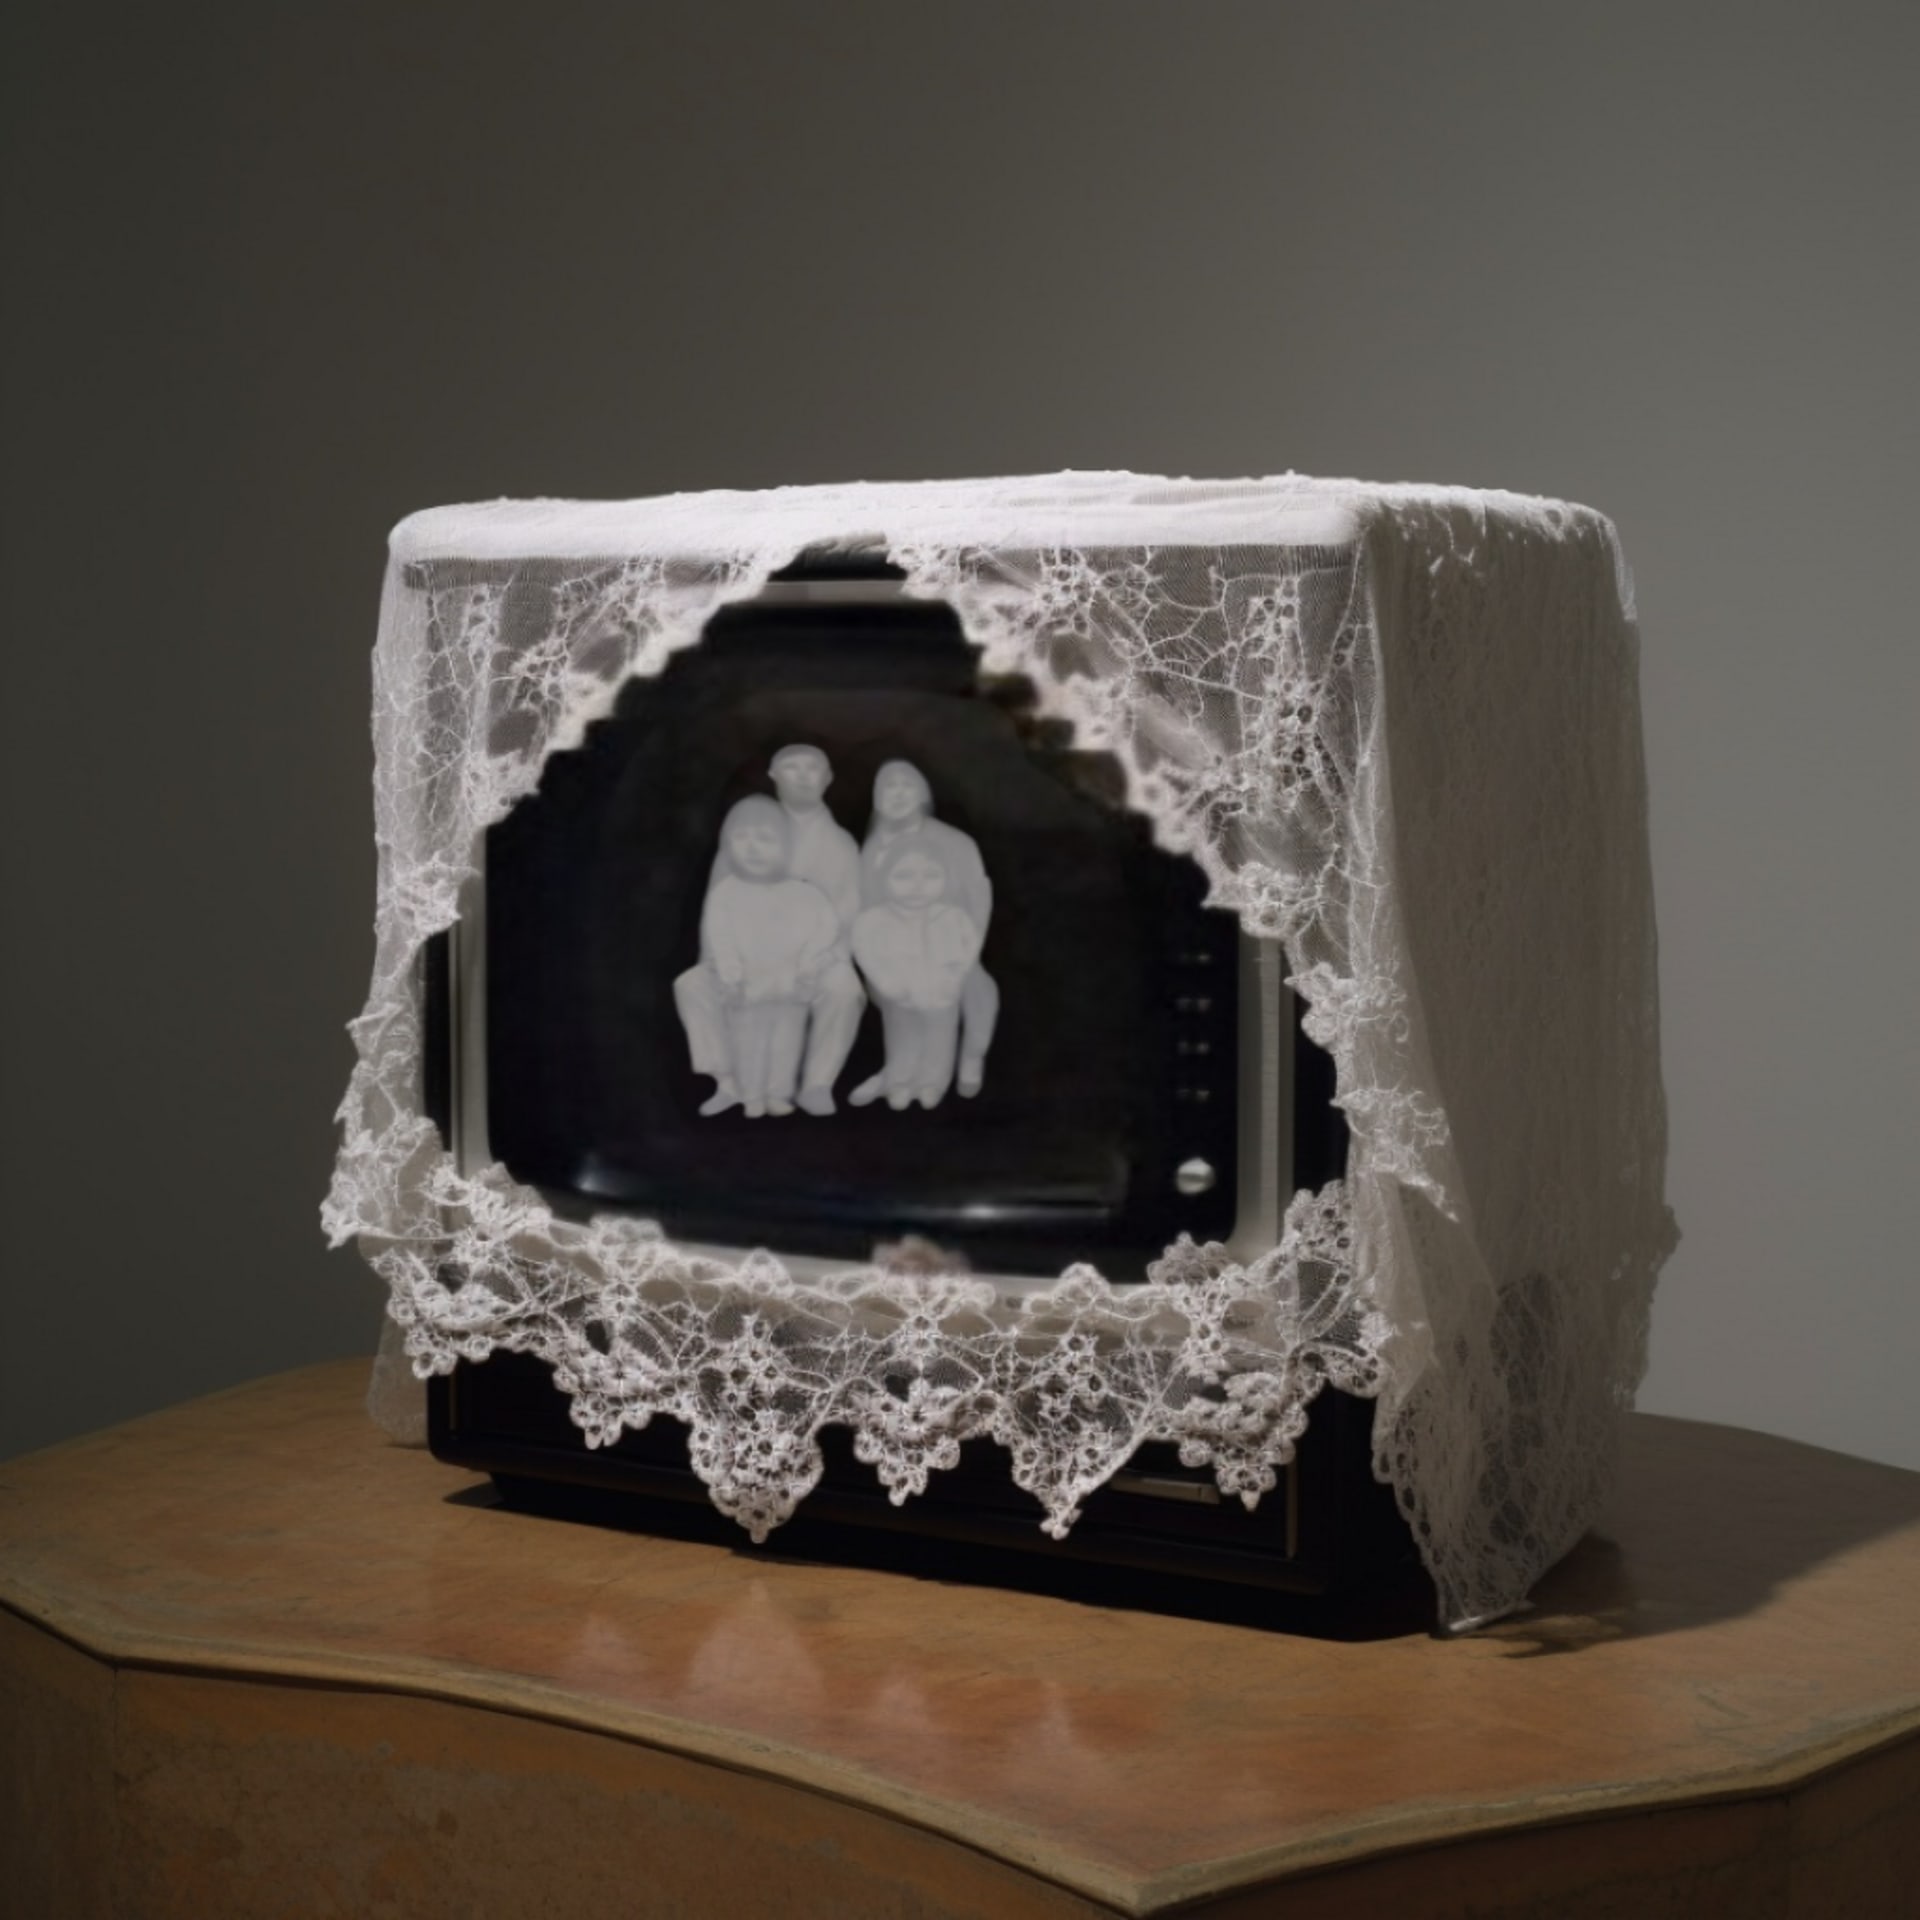 An old tv with lace cover